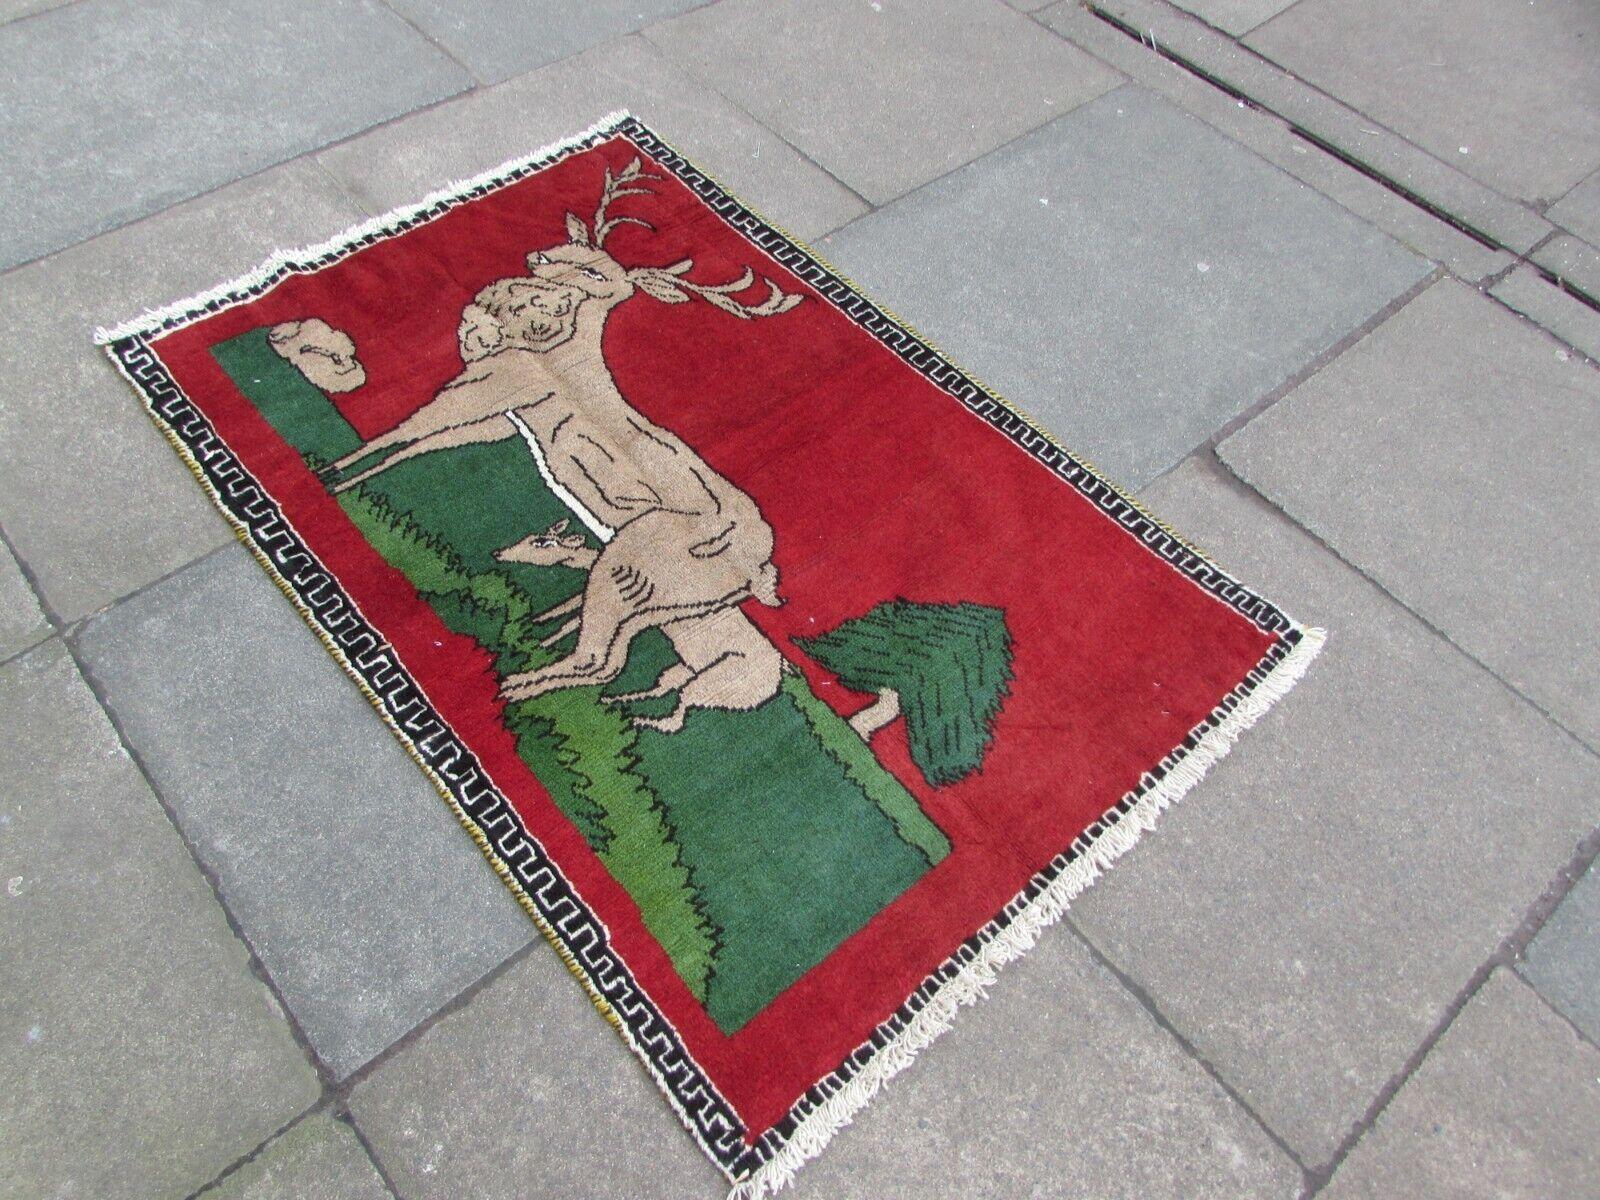 Handmade Vintage Persian Style Gabbeh Rug With Deer 2.6' x 4', 1970s - 1Q71 For Sale 2